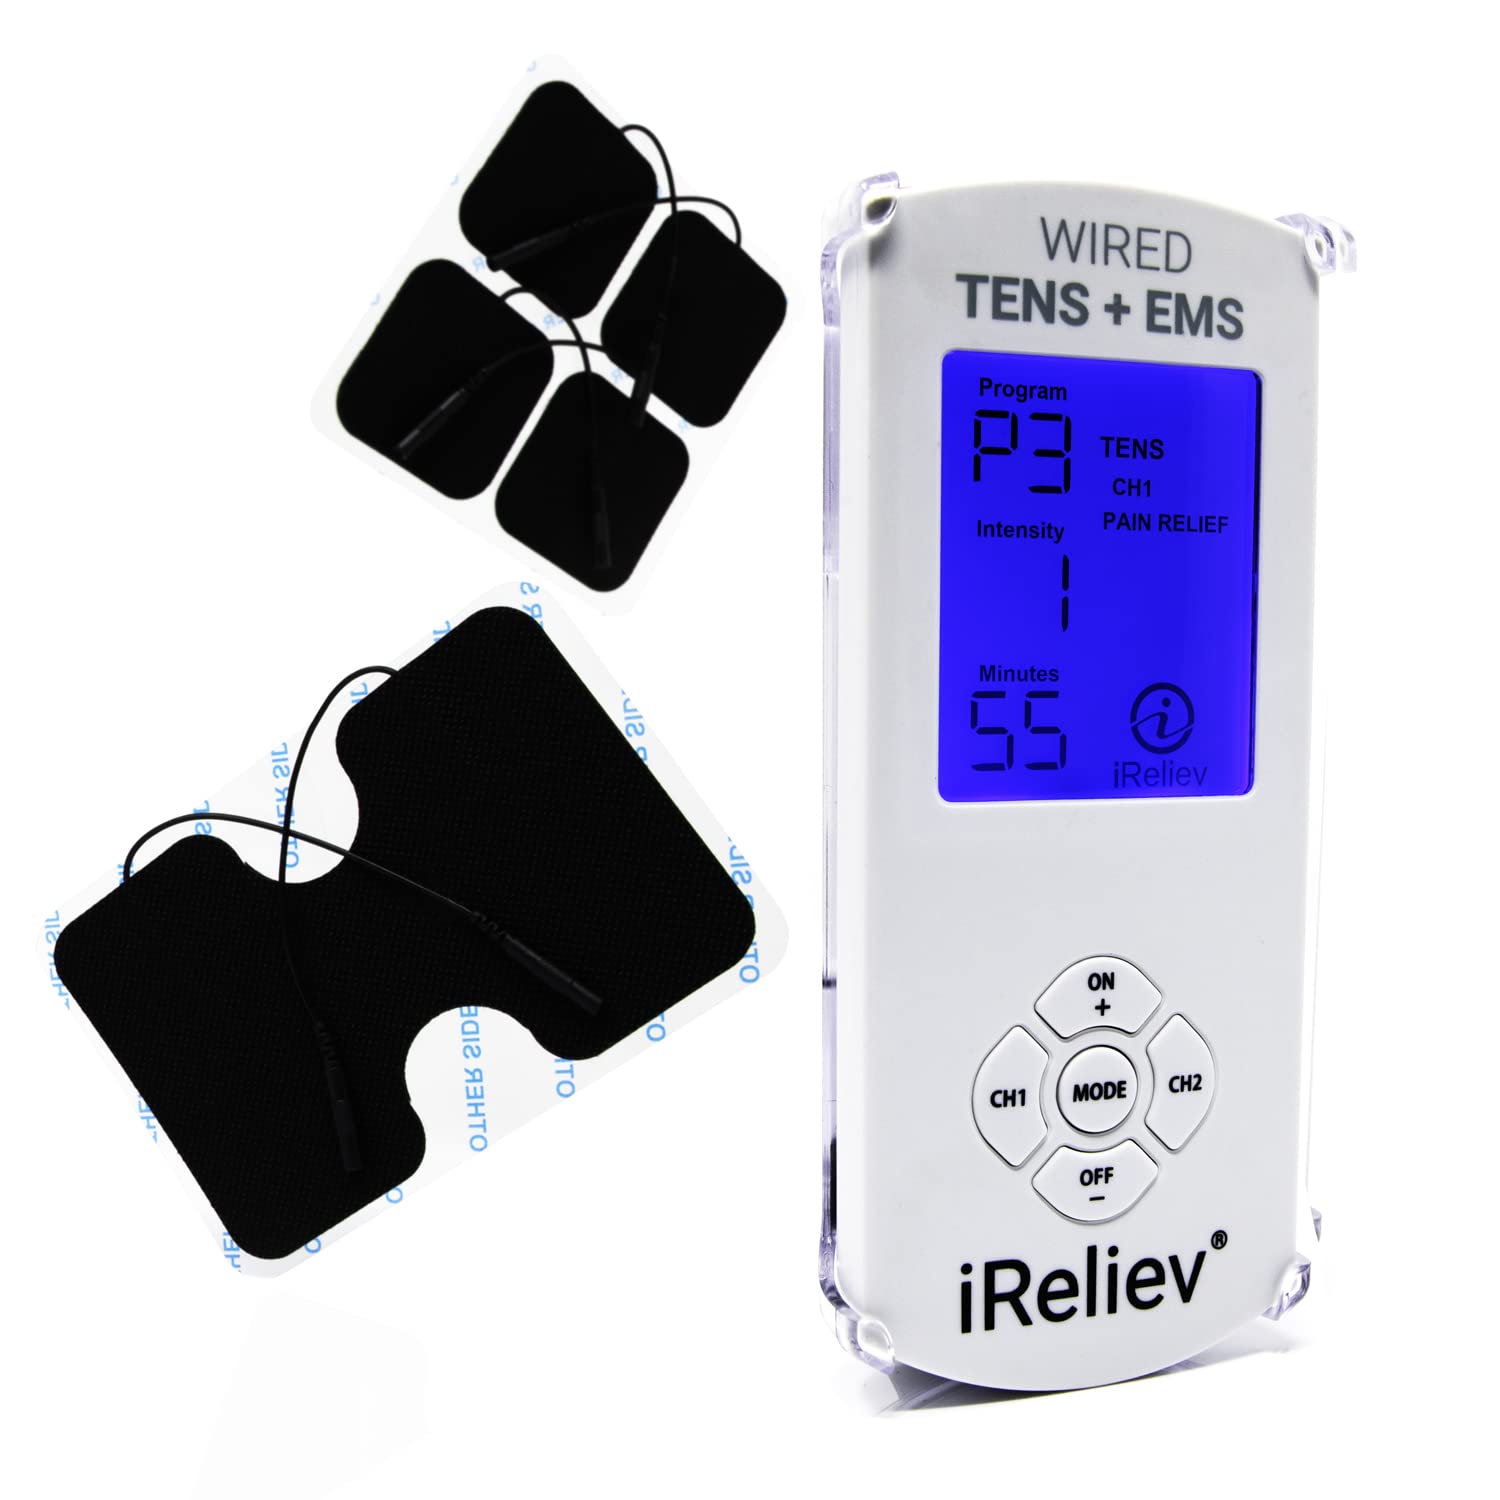 Tens Units Muscle Stimulator Heating Pads Combo Drug Free Pain Relief  Therapy